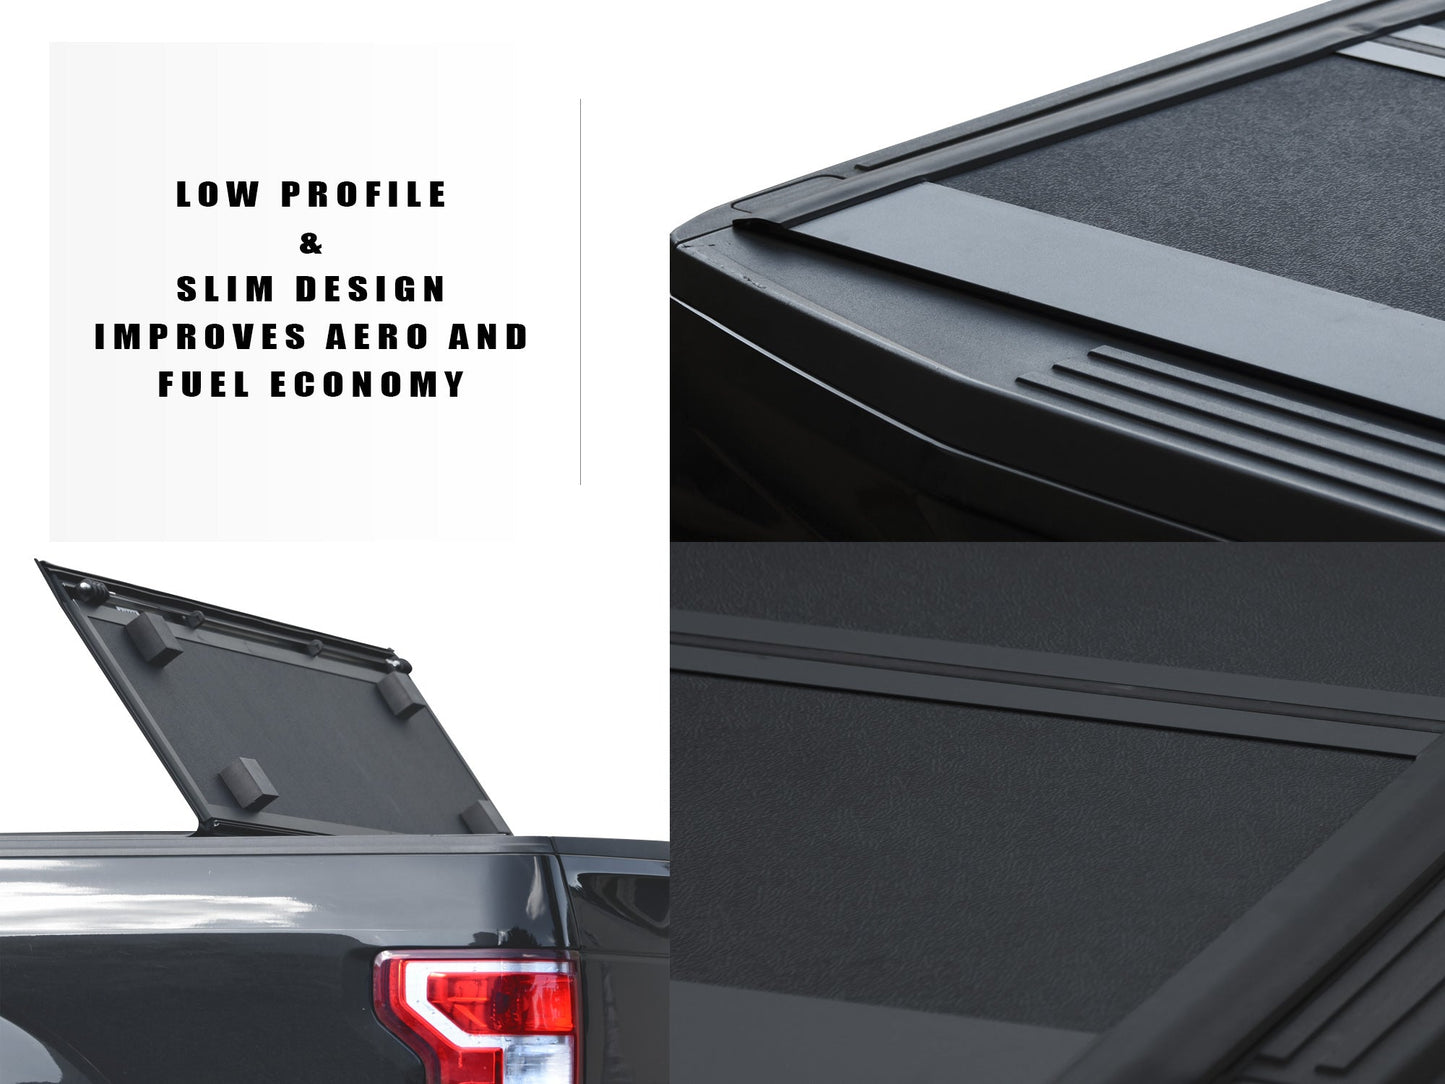 Armordillo 2007-2013 Toyota Tundra CoveRex TFX Series Folding Truck Bed Tonneau Cover (6.5 Ft Bed) - Bayson R Motorsports